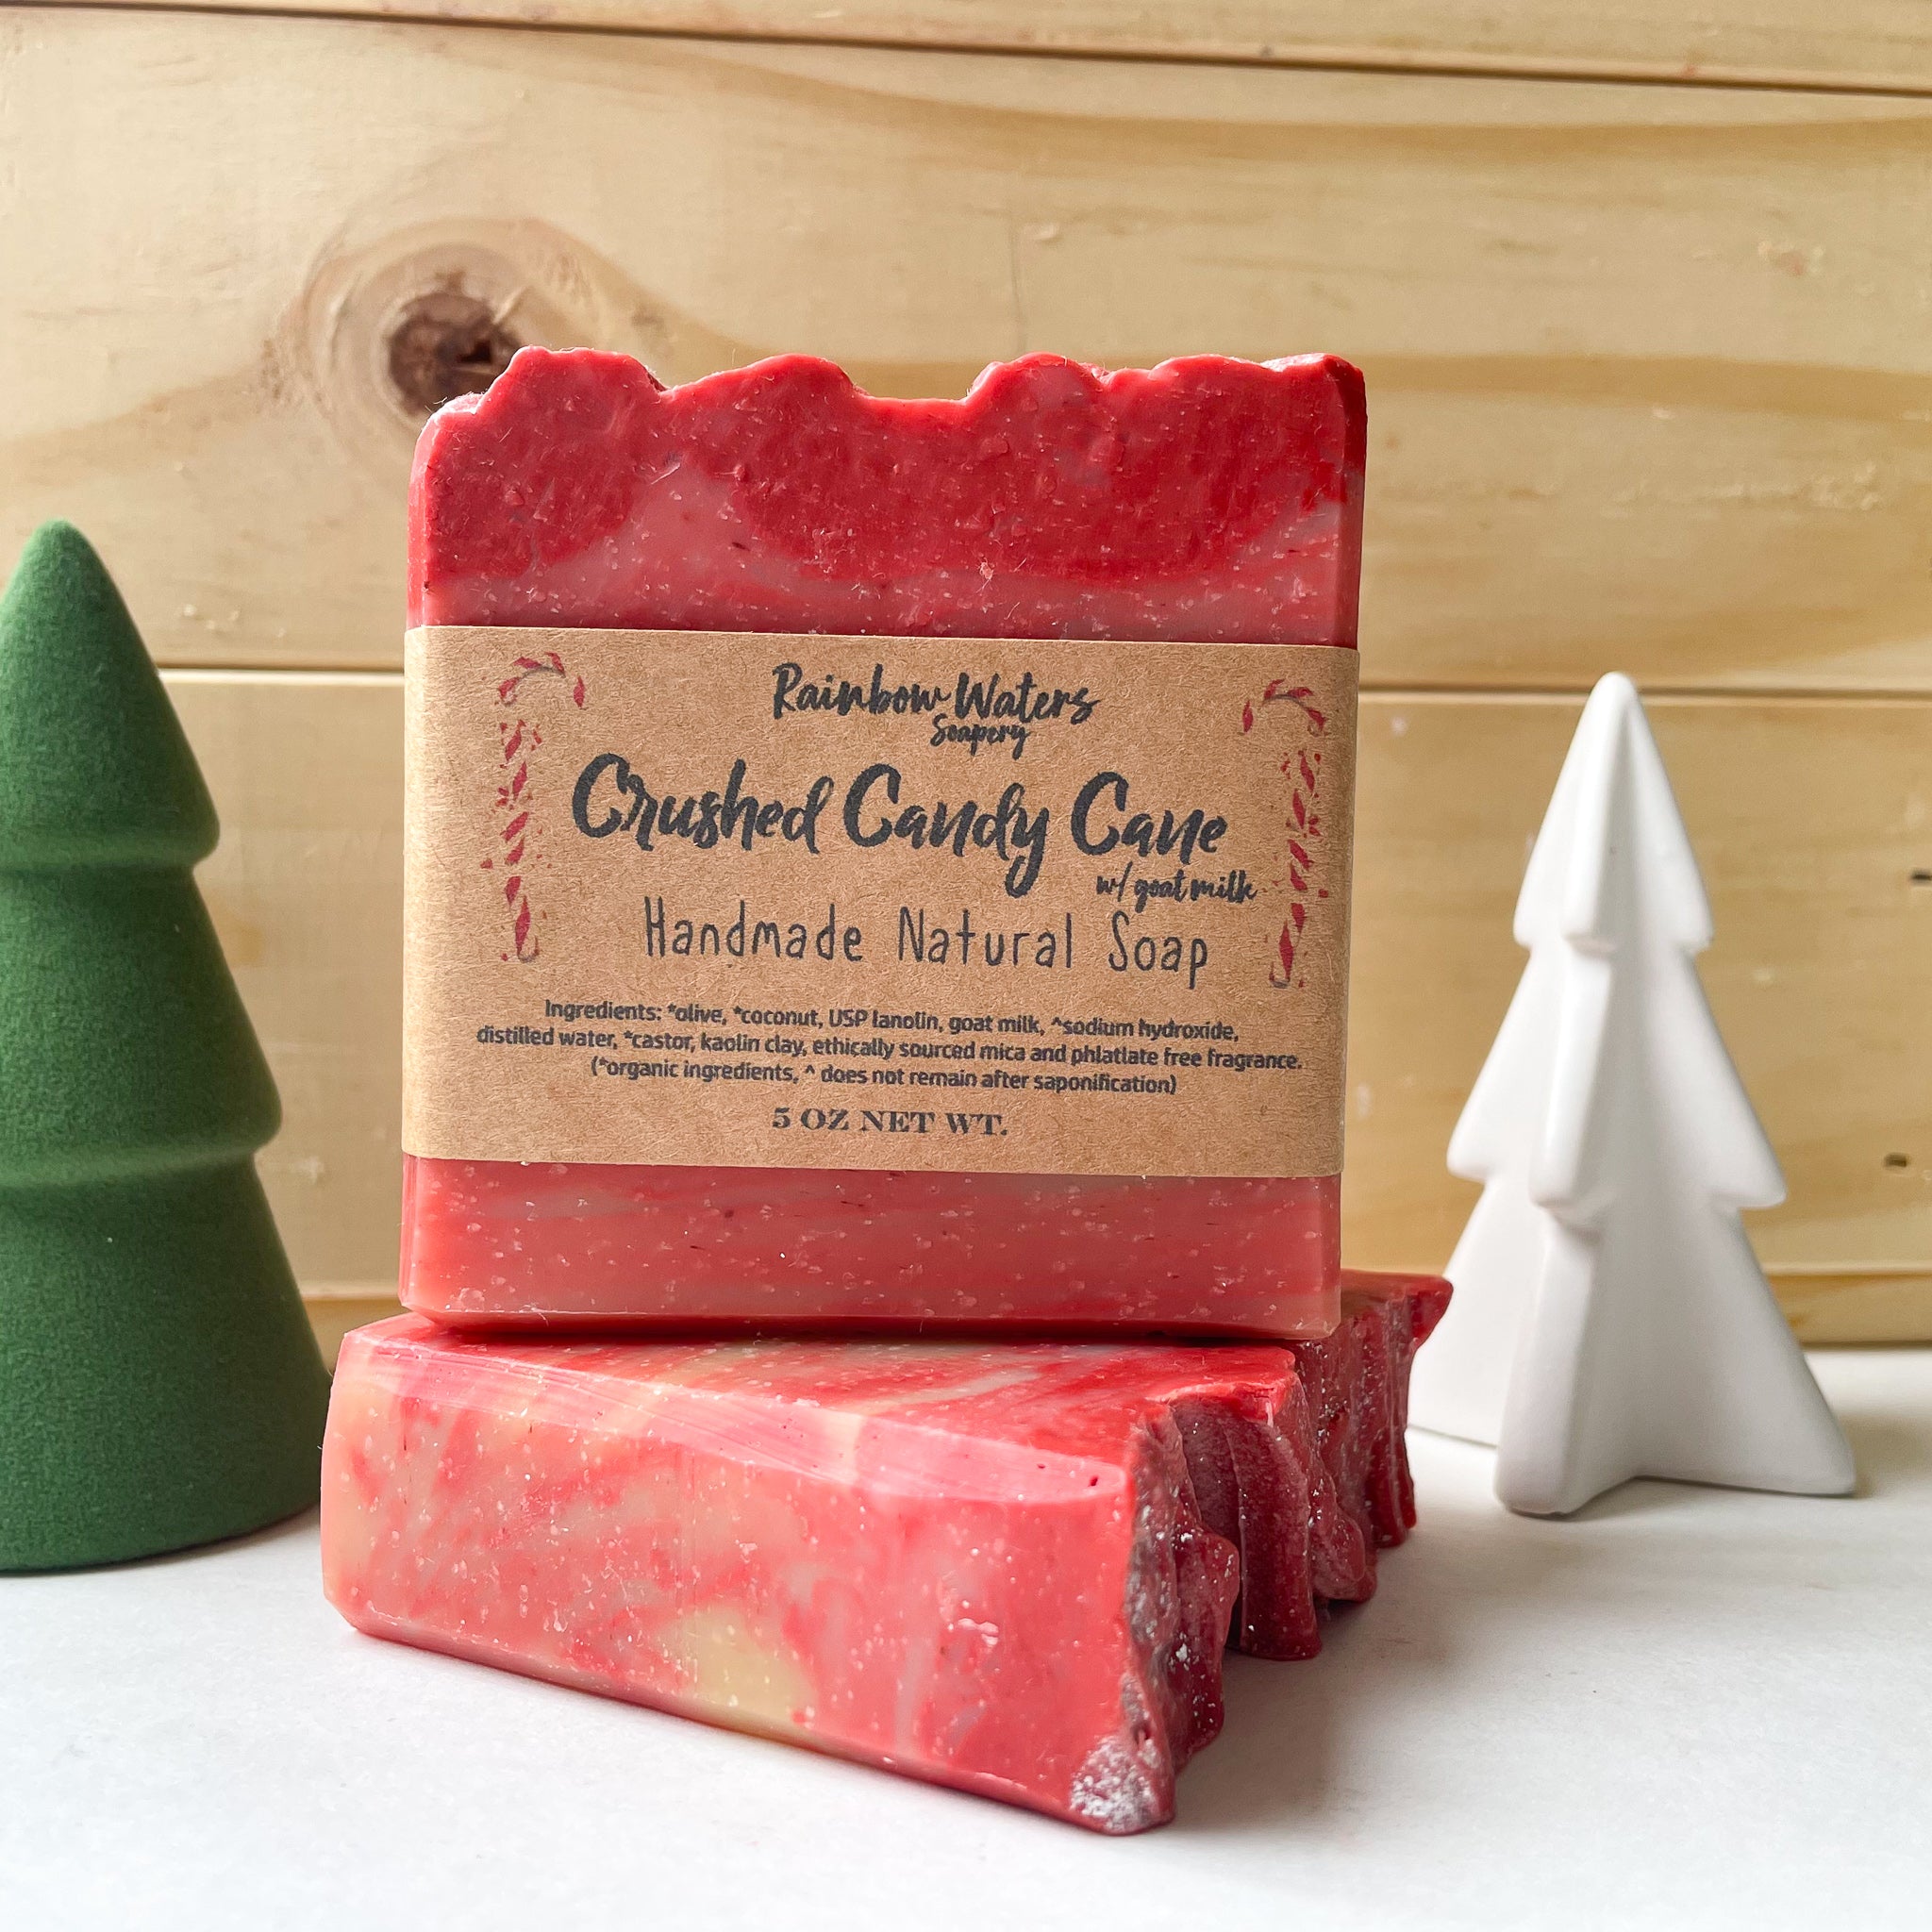 Crushed Candy Cane Handcrafted Hand & Body Soap Bar, with goat milk